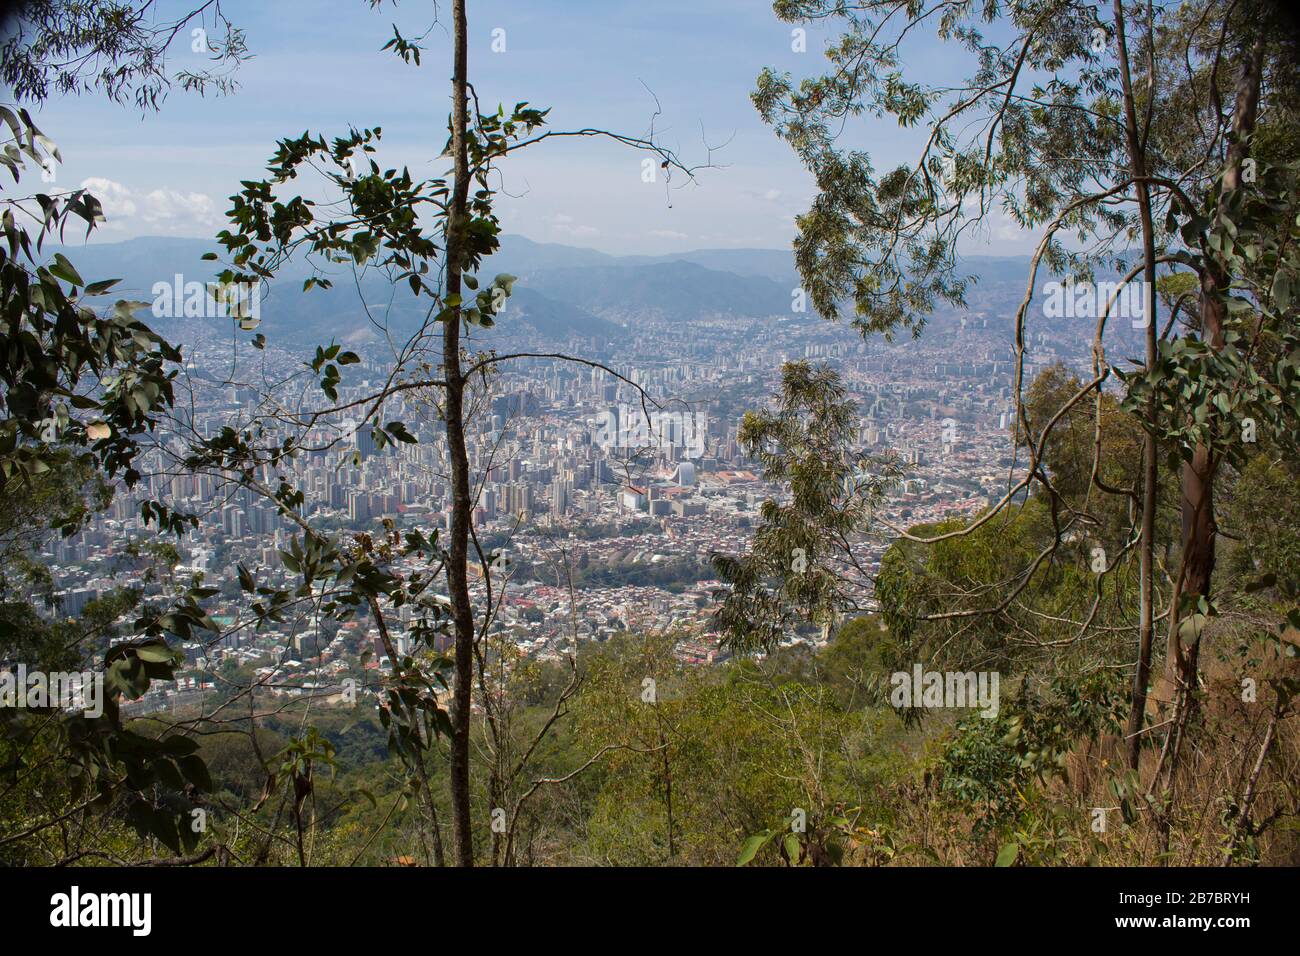 View of the city of Caracas from the El Avila mountain forest Stock Photo